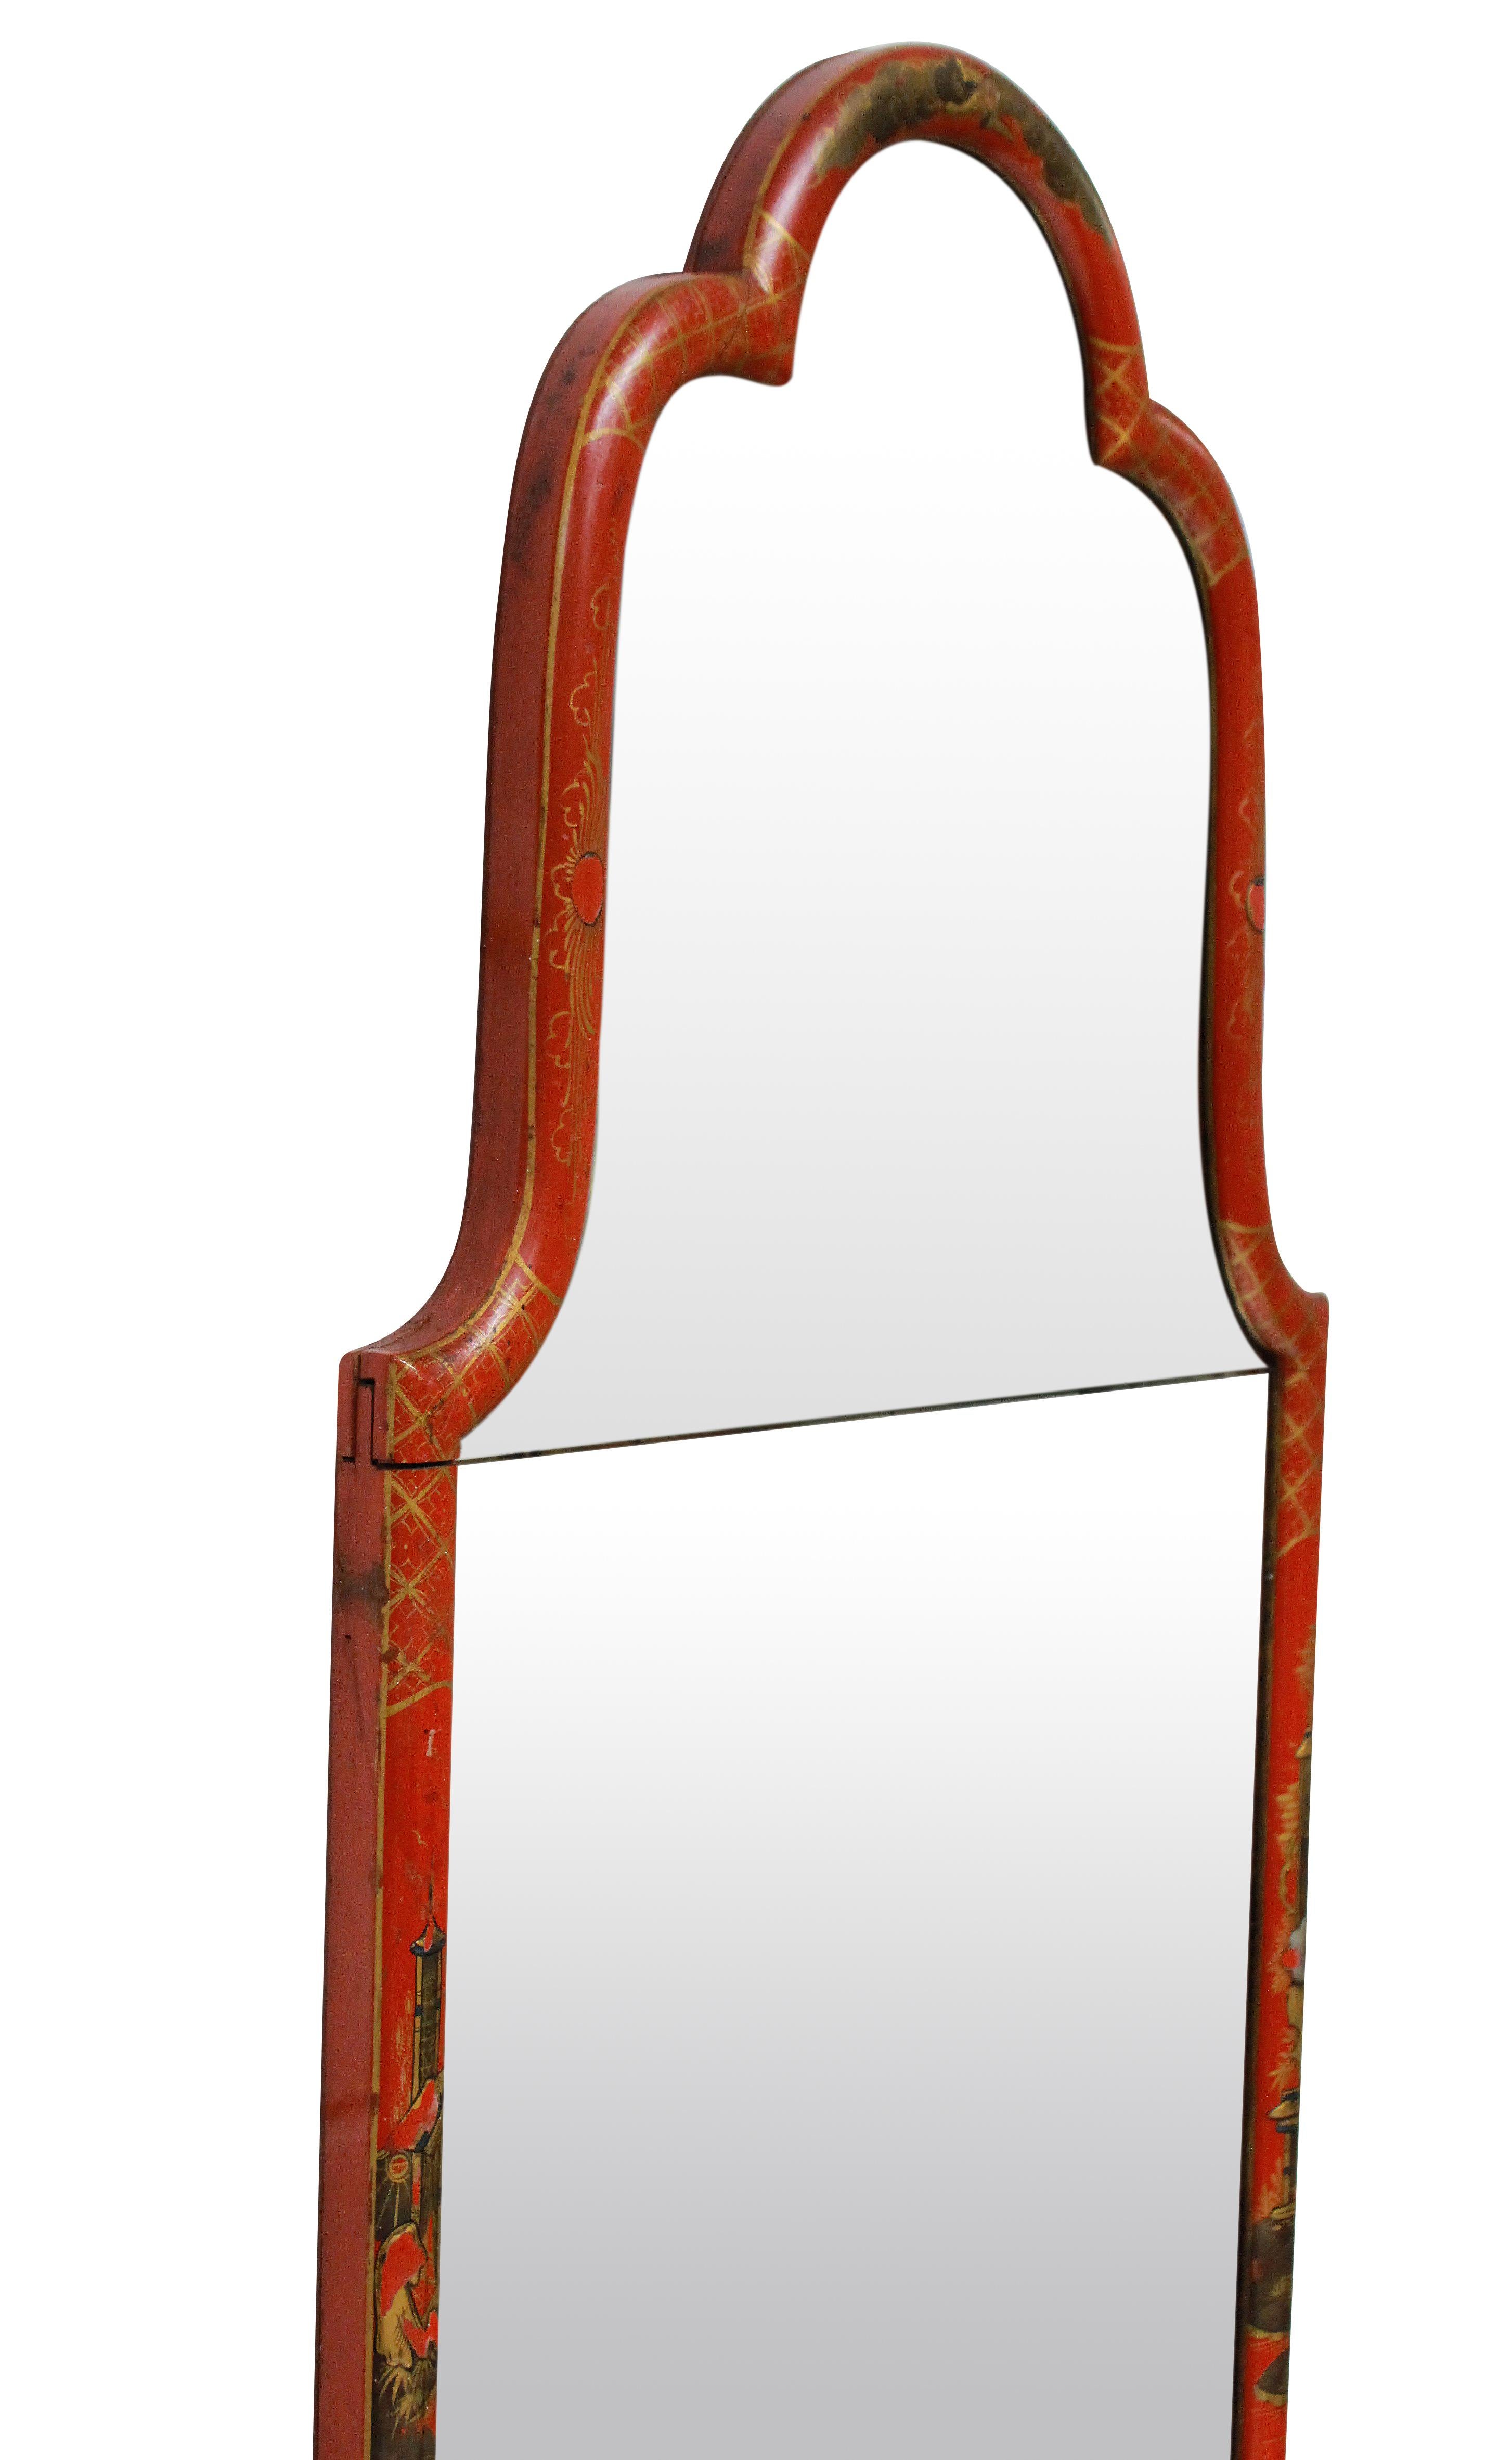 A fine English Queen Anne style Japanned mirror, in red lacquer, with its original beveled split mirror plate.

 